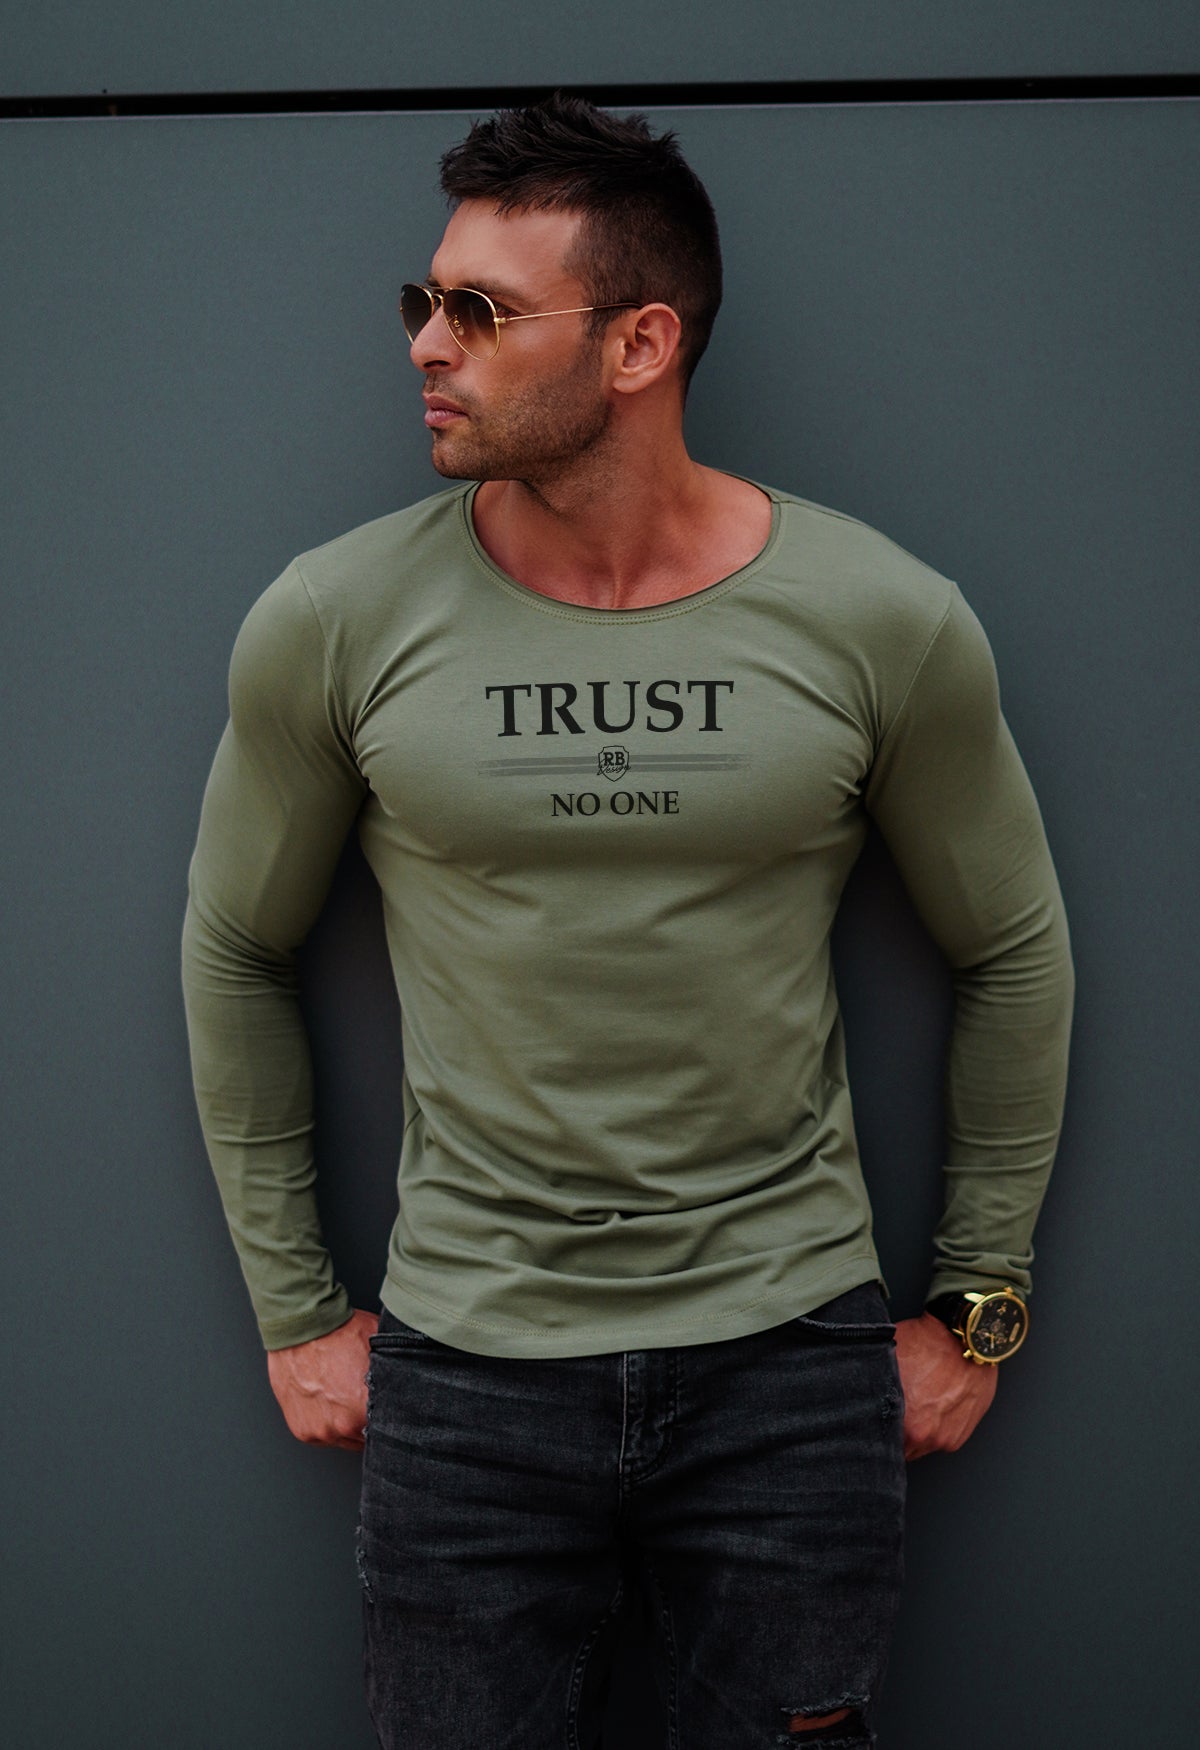 Mens Long Sleeve T-shirt "TRUST NO ONE" MD976